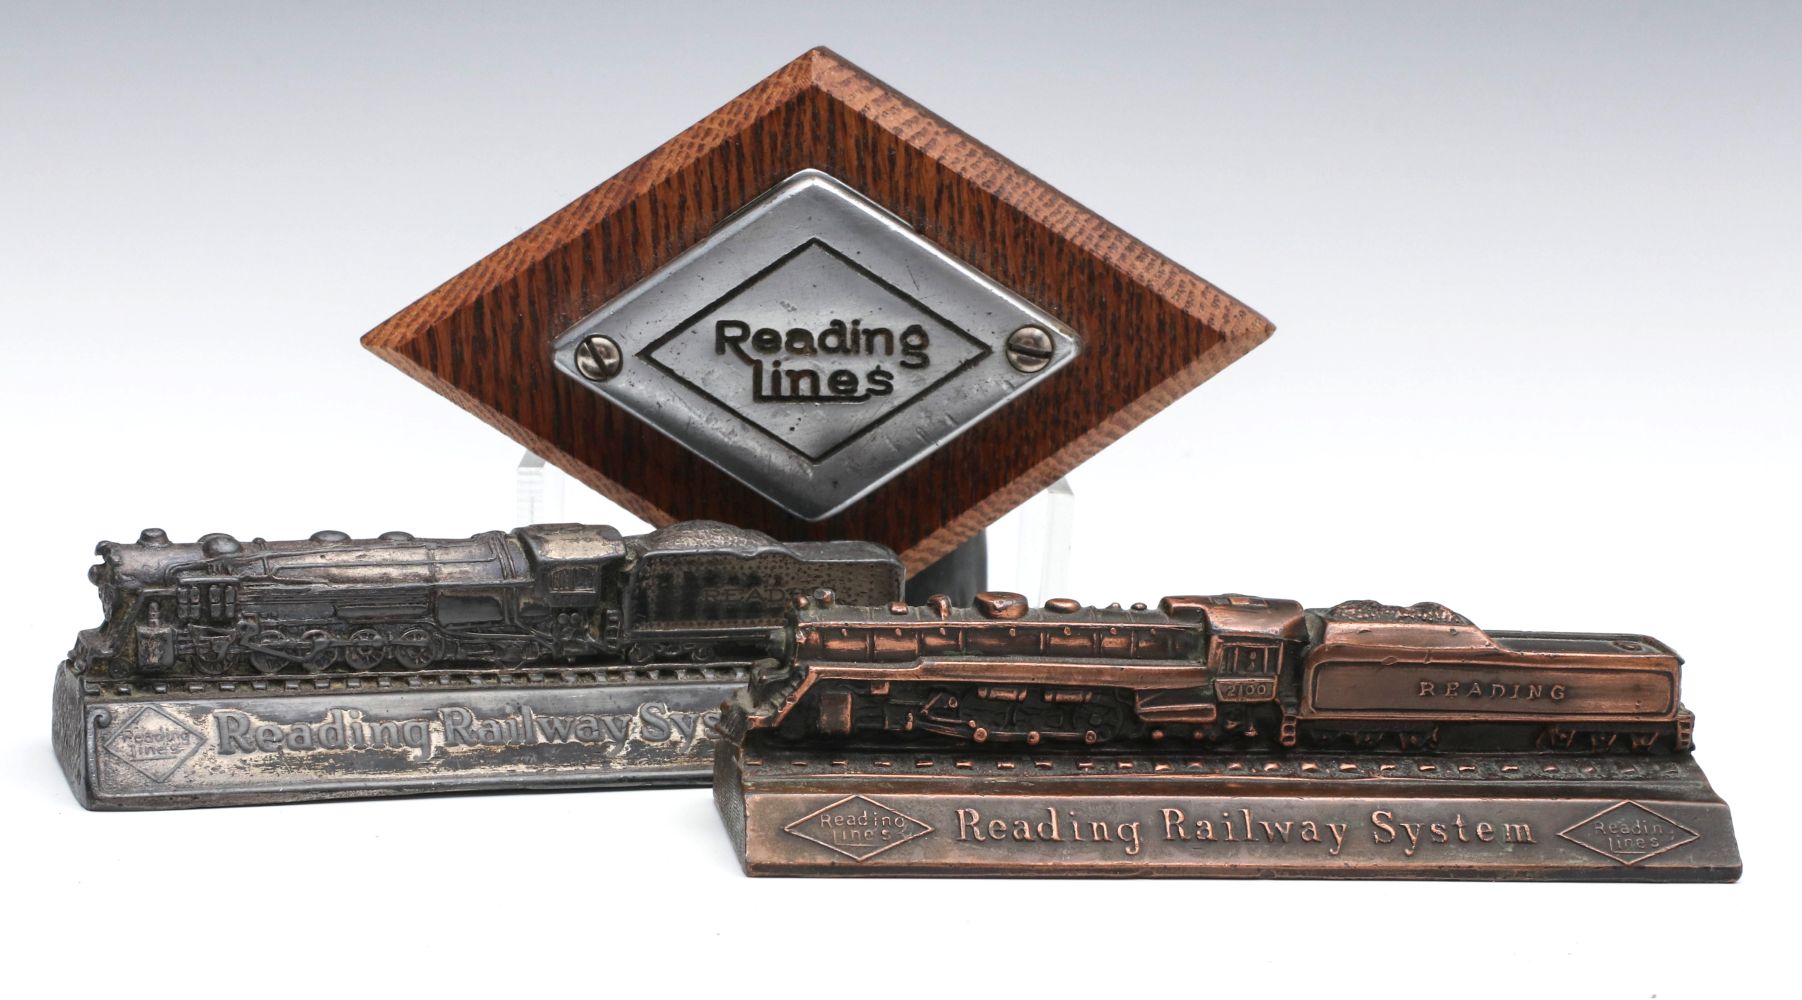 READING RAILWAY SYSTEM BADGE AND DESK ORNAMENTS